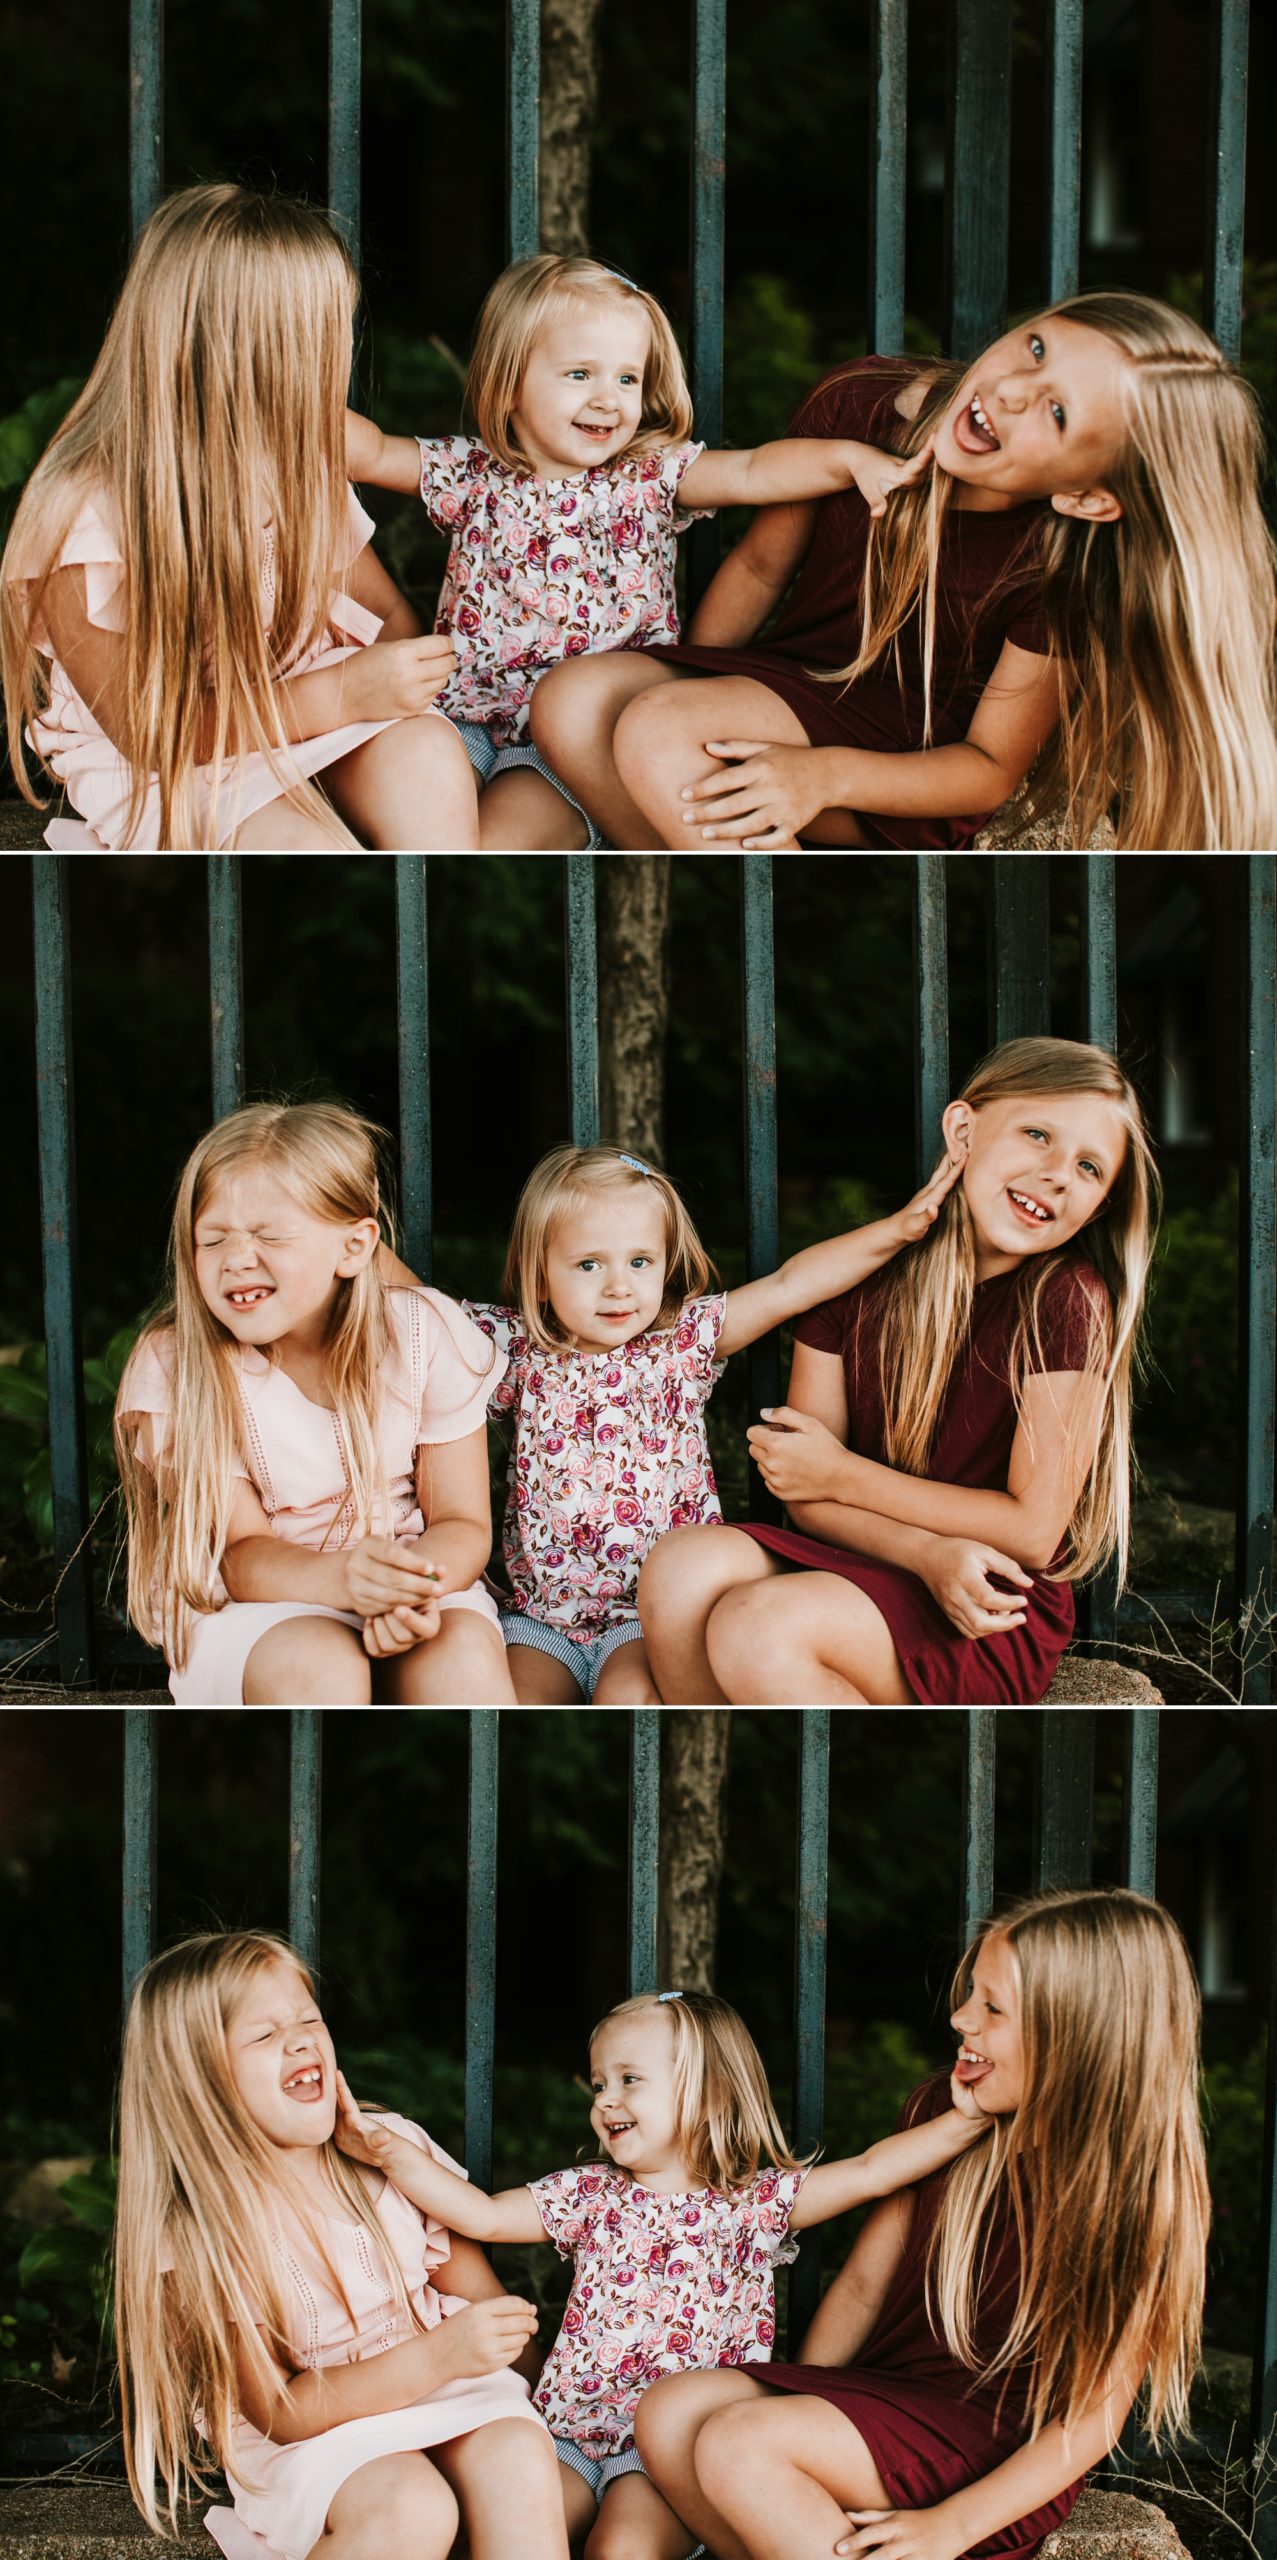 Silly images of siblings making faces at each other at a photo session. Bloopers and outtakes.  Baby Photographer 63090